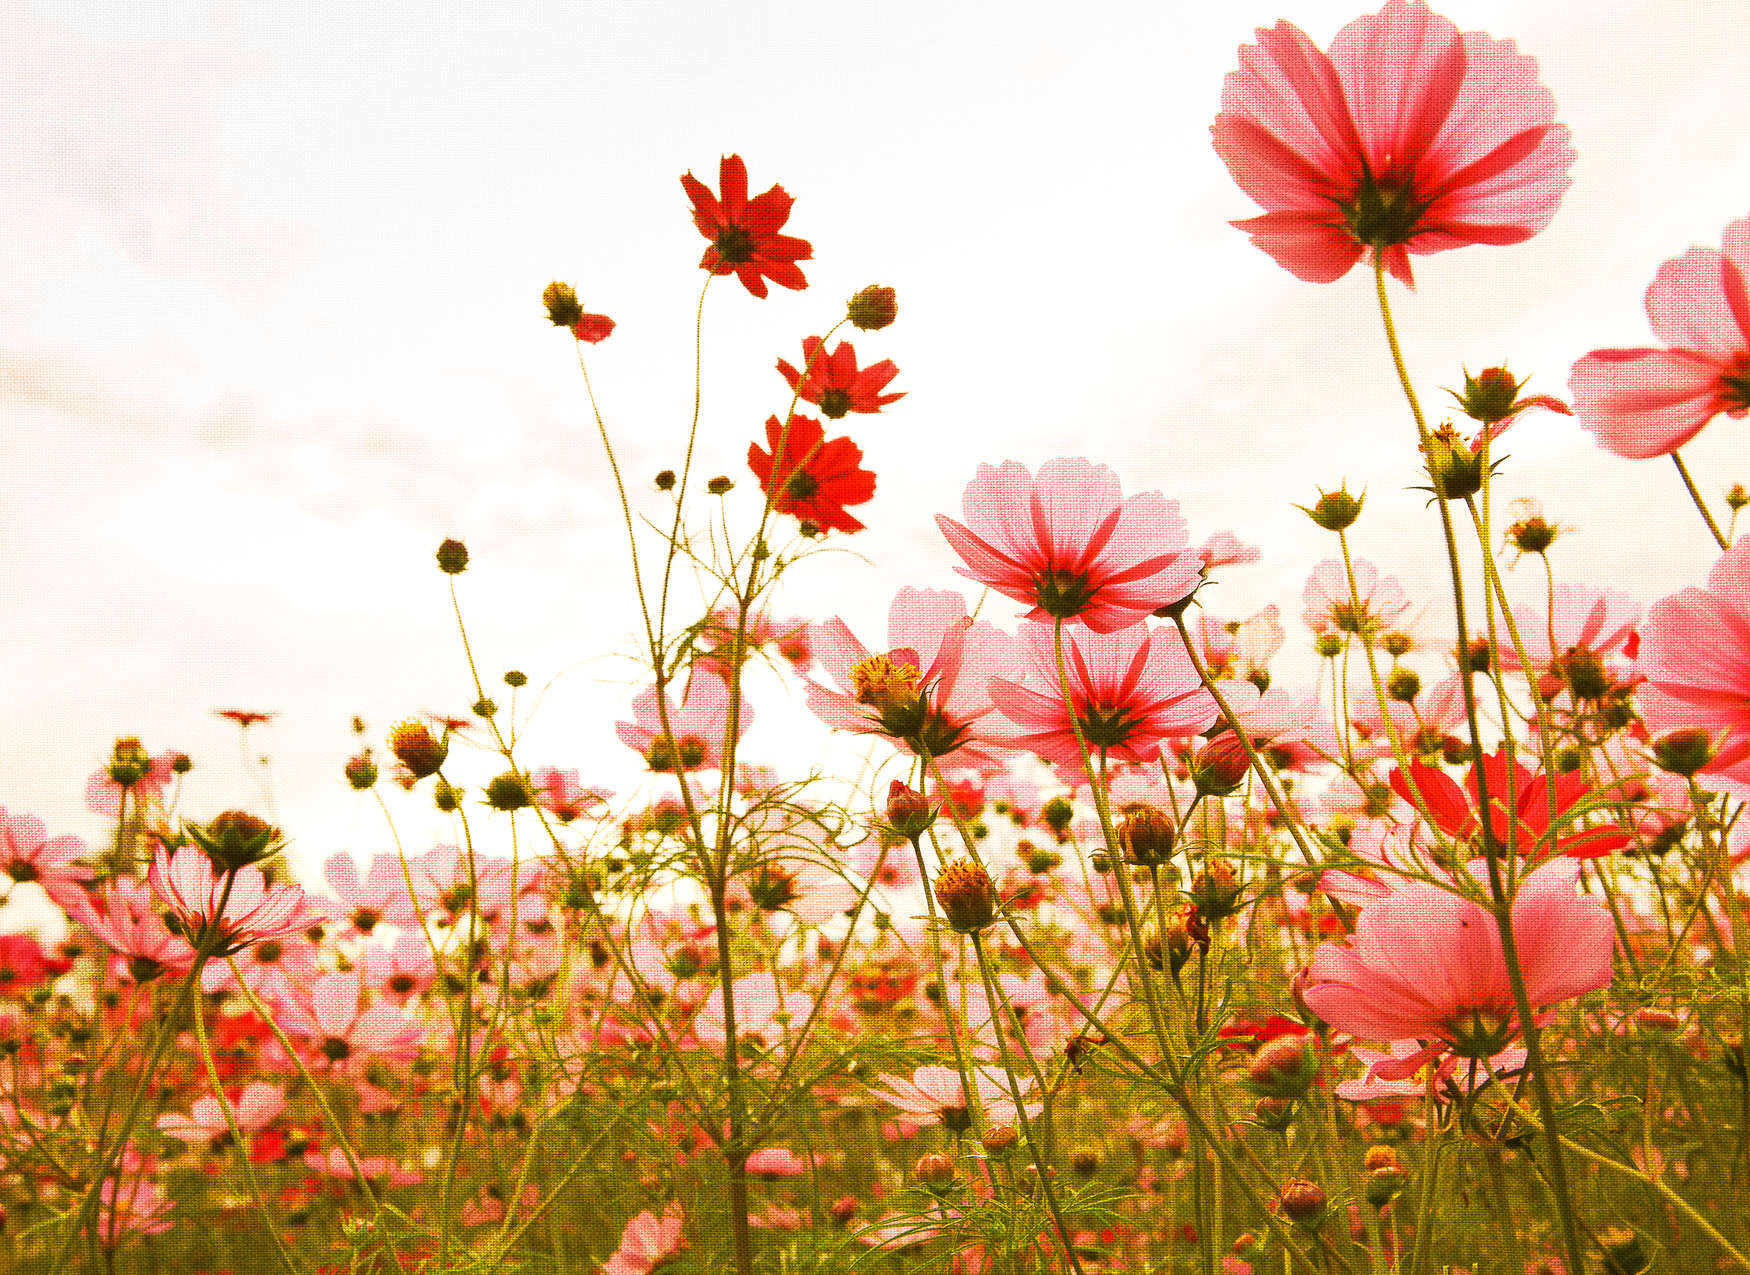             Flower meadow in spring - pink, green, white
        